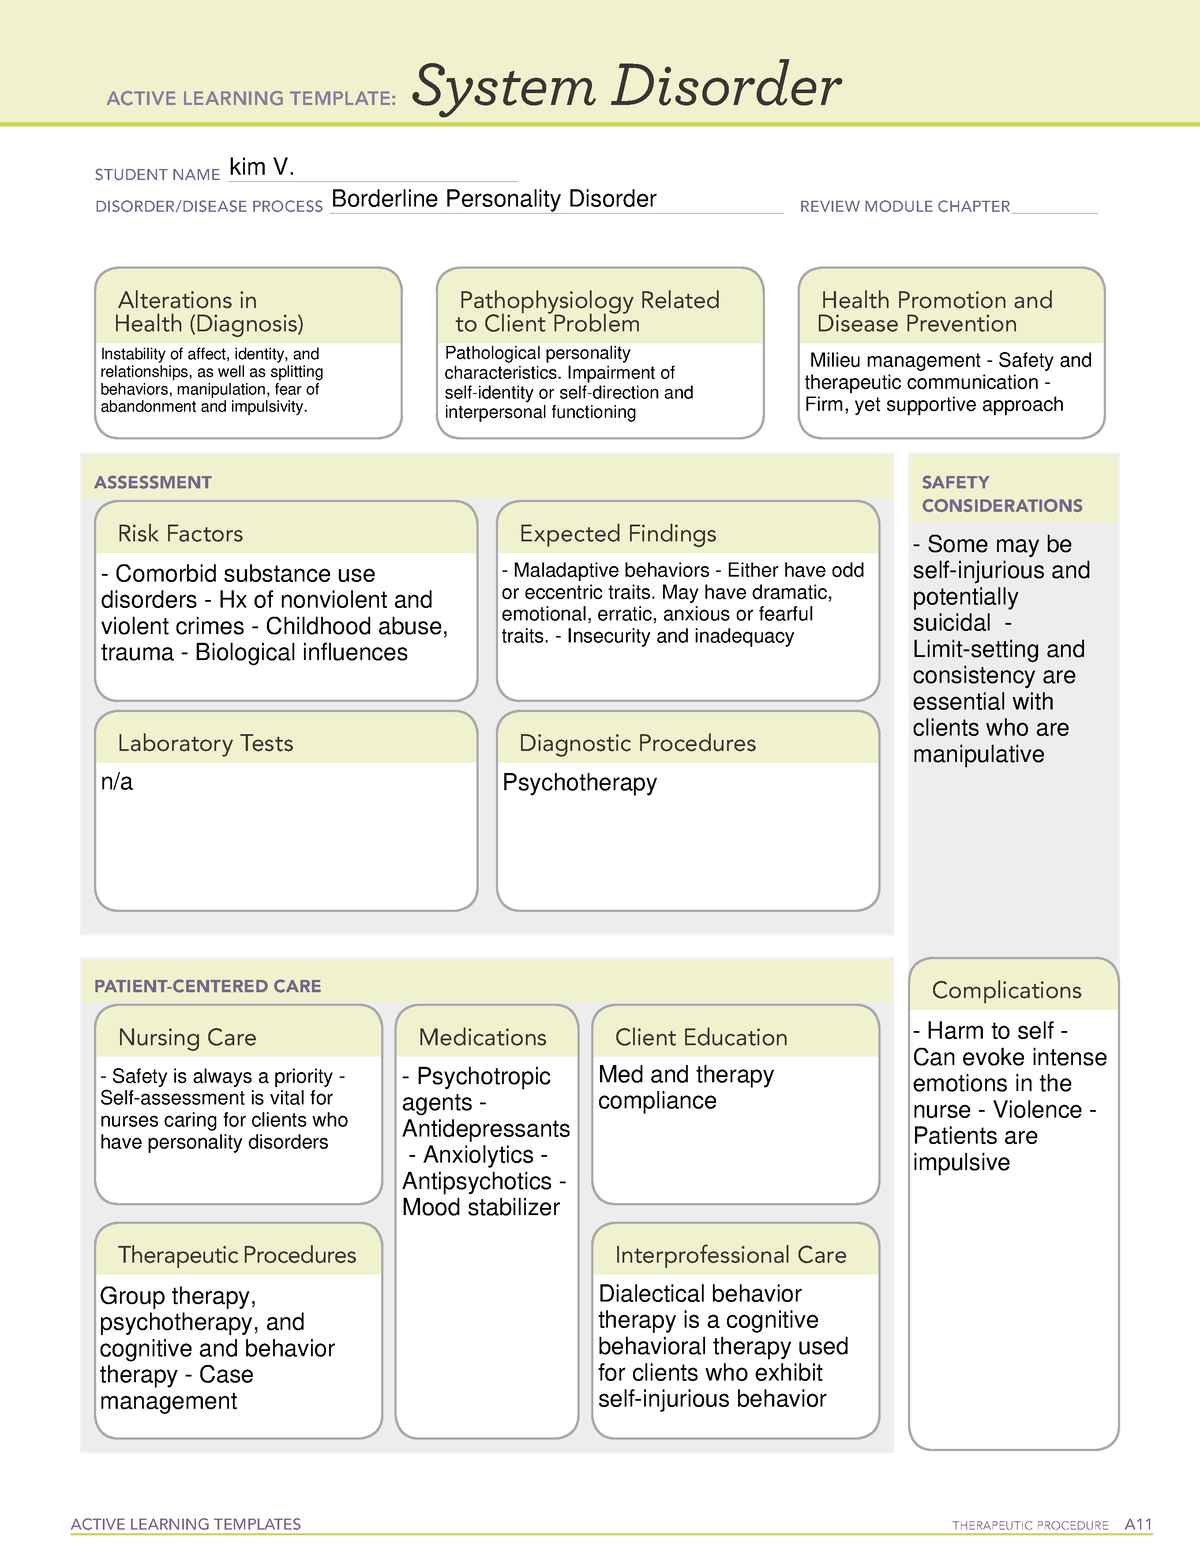 bpd-borderline-personality-disorder-active-learning-templates-therapeutic-procedure-a-system